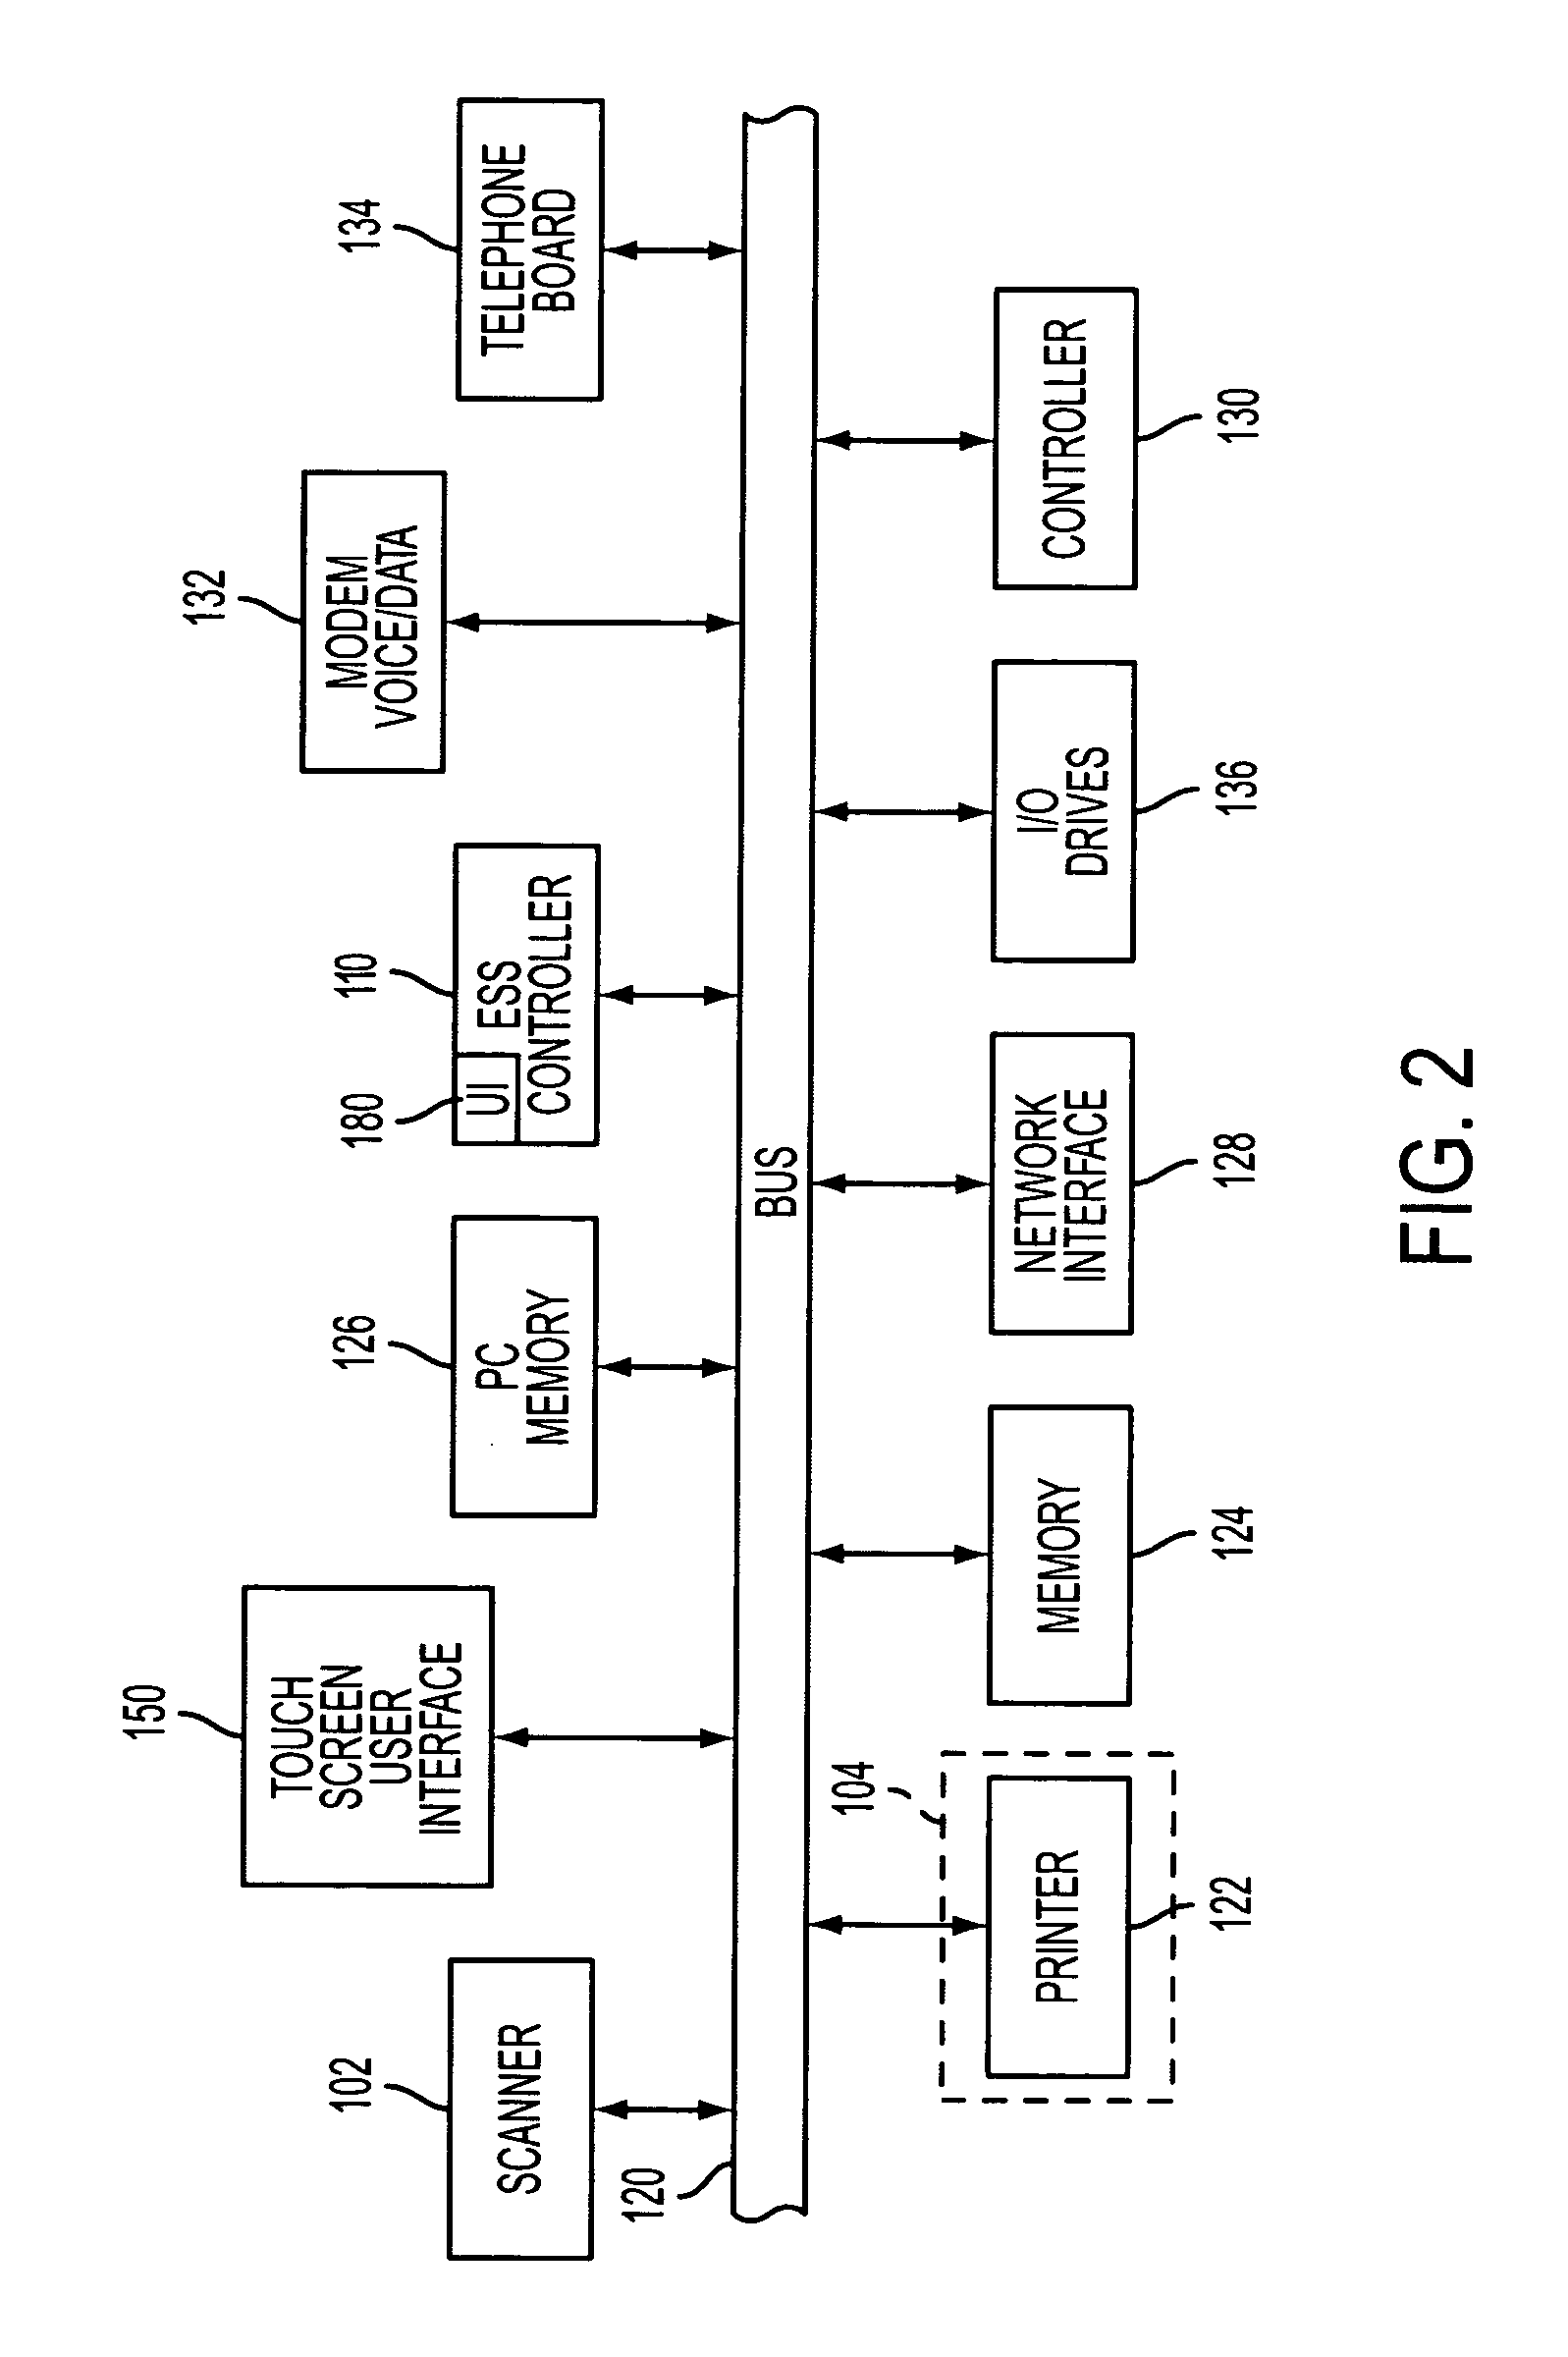 Touch screen user interface for digital reprographic device with pop-up menu display